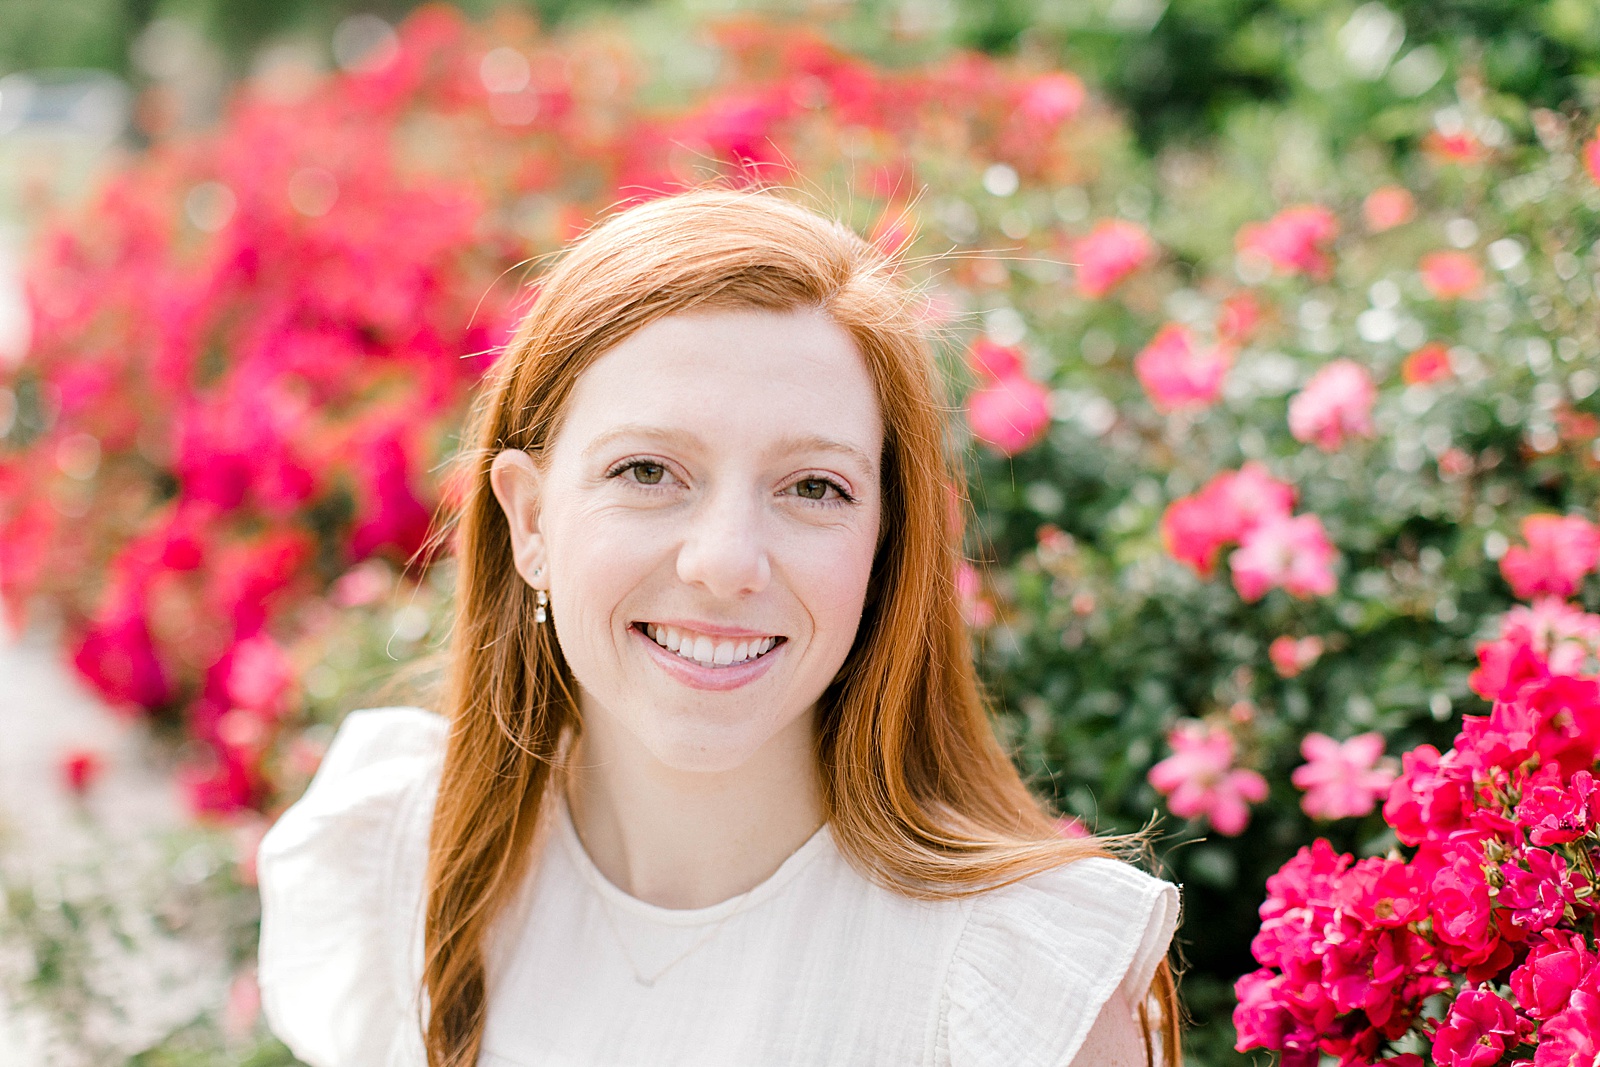 ou senior photos in front of rose bush on campus by melanie foster photography